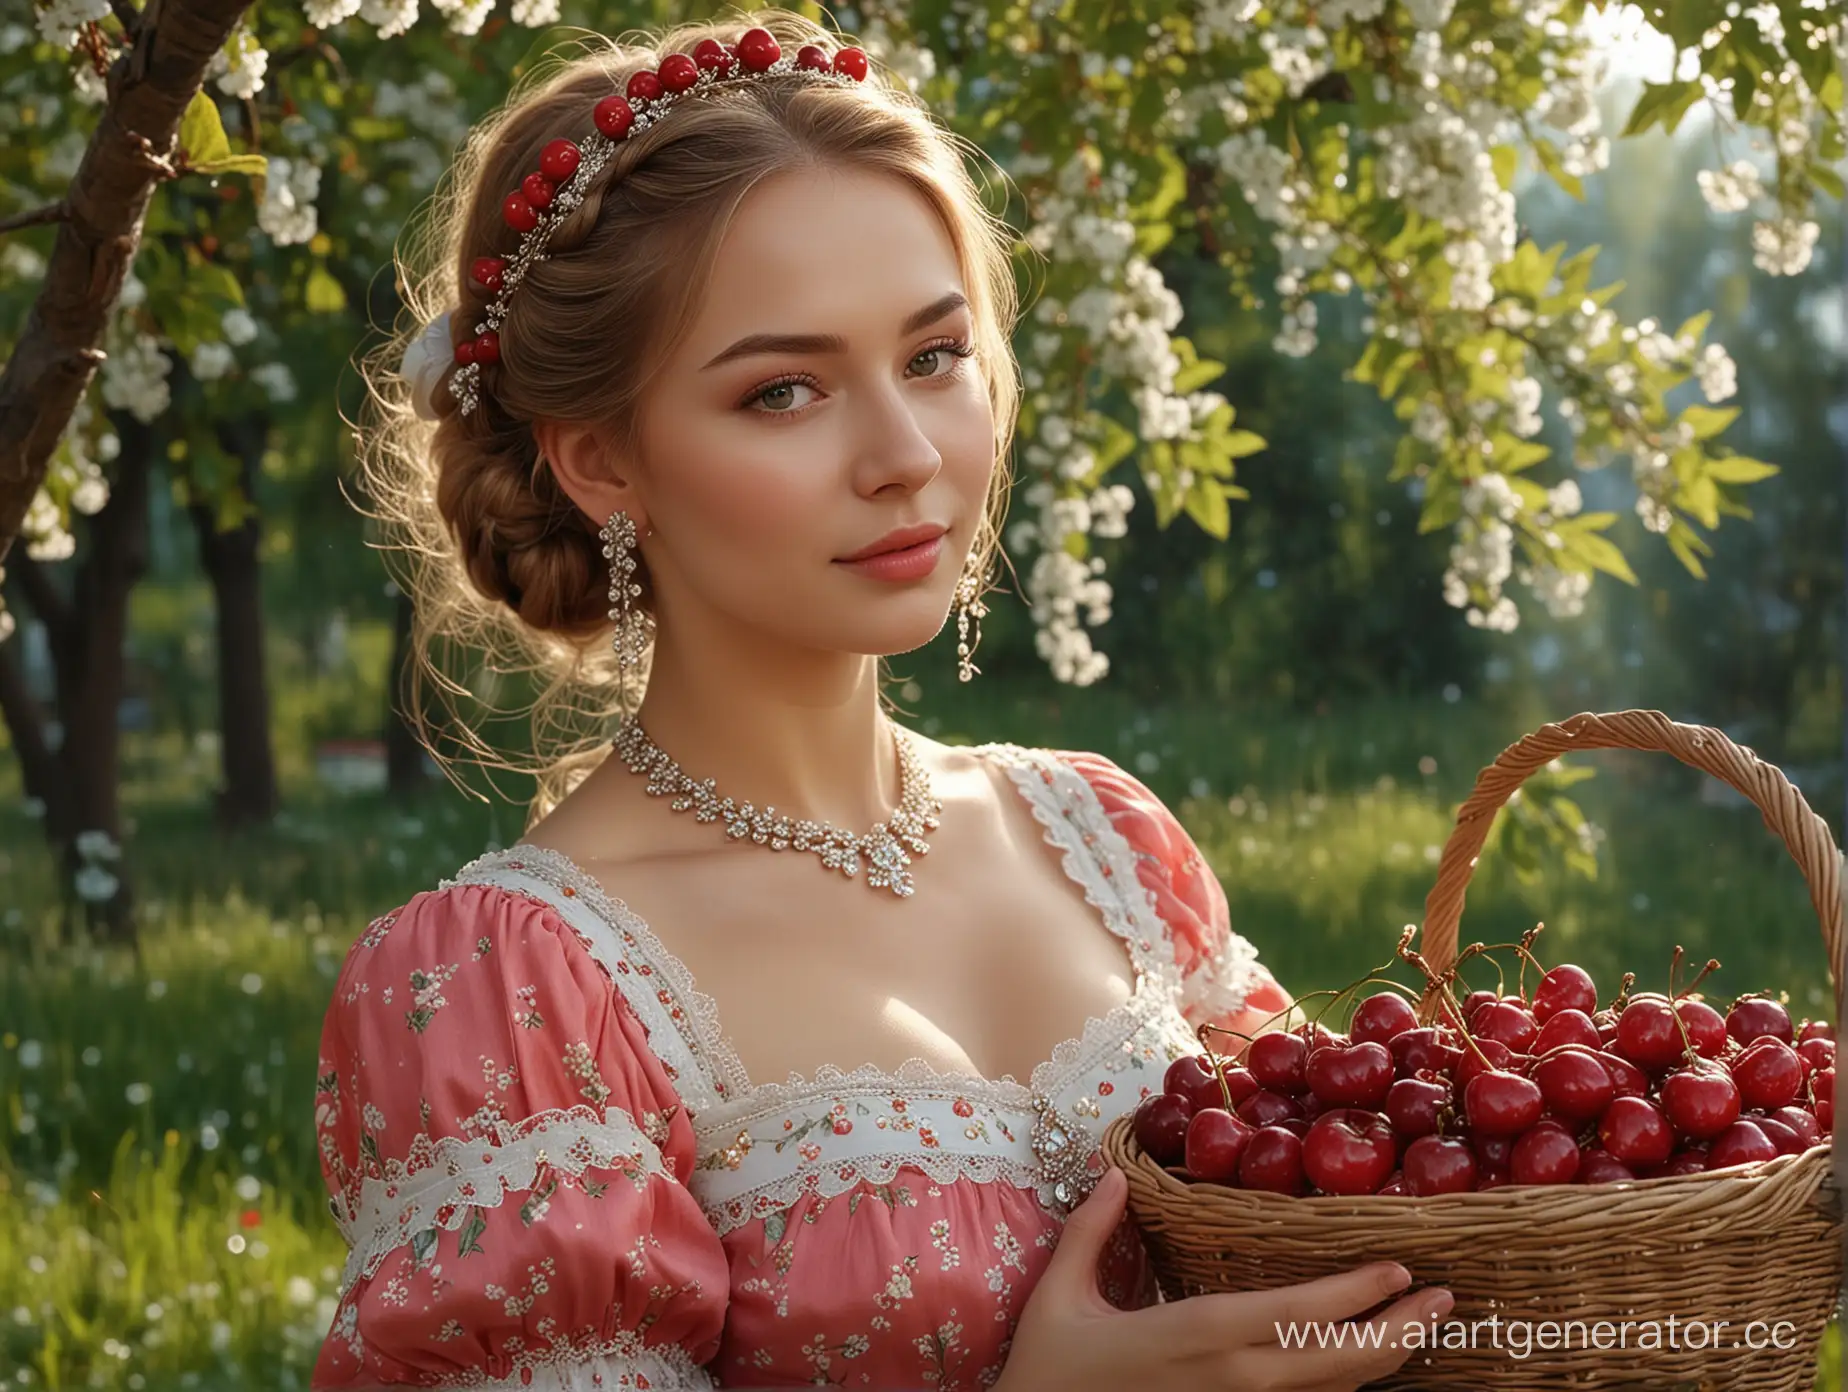 Russian-Sweetheart-in-Floral-Sundress-with-Cherry-Basket-and-Kokoshnik